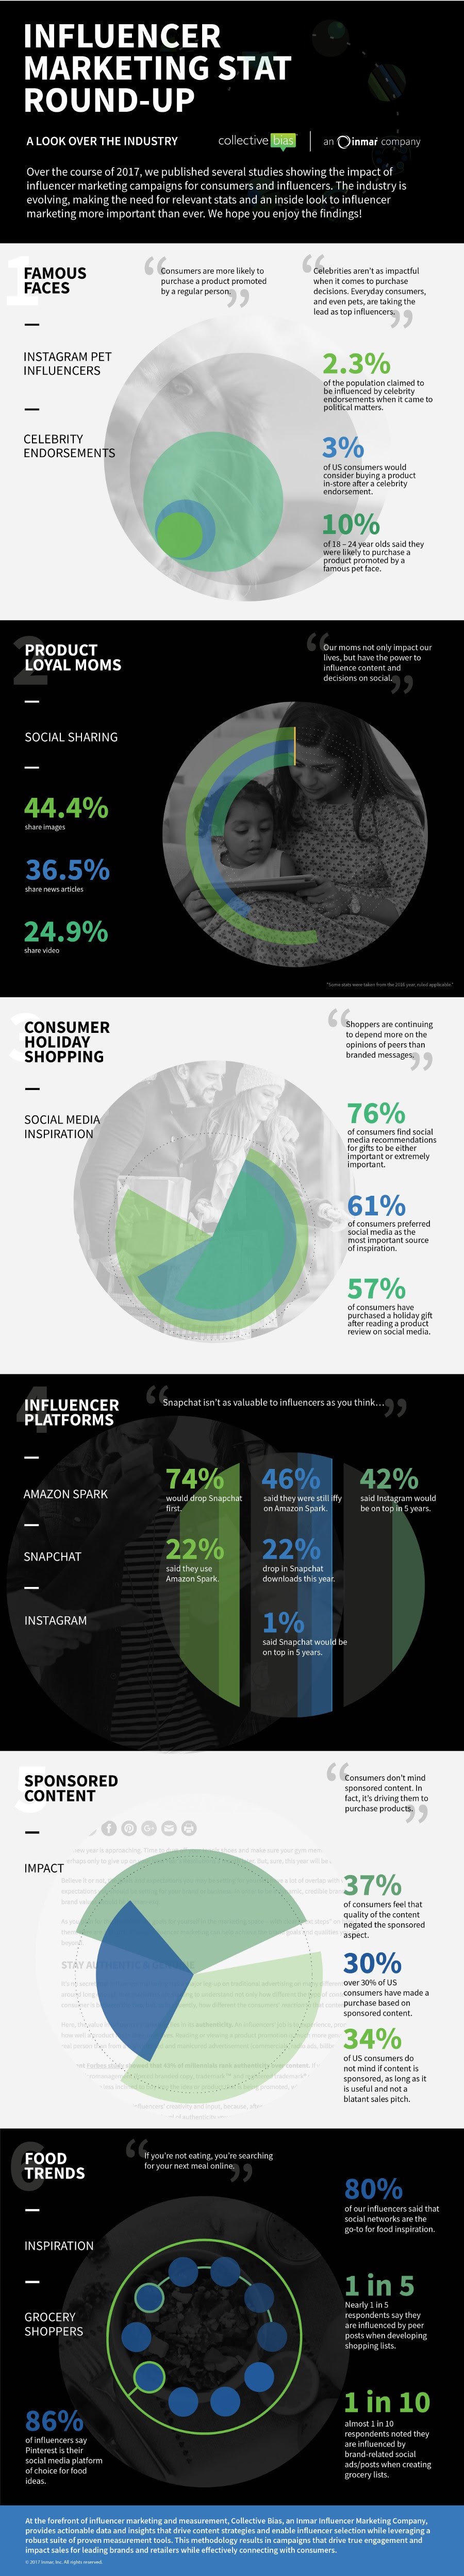 Influencer Marketing Stats Round-Up - #infographic